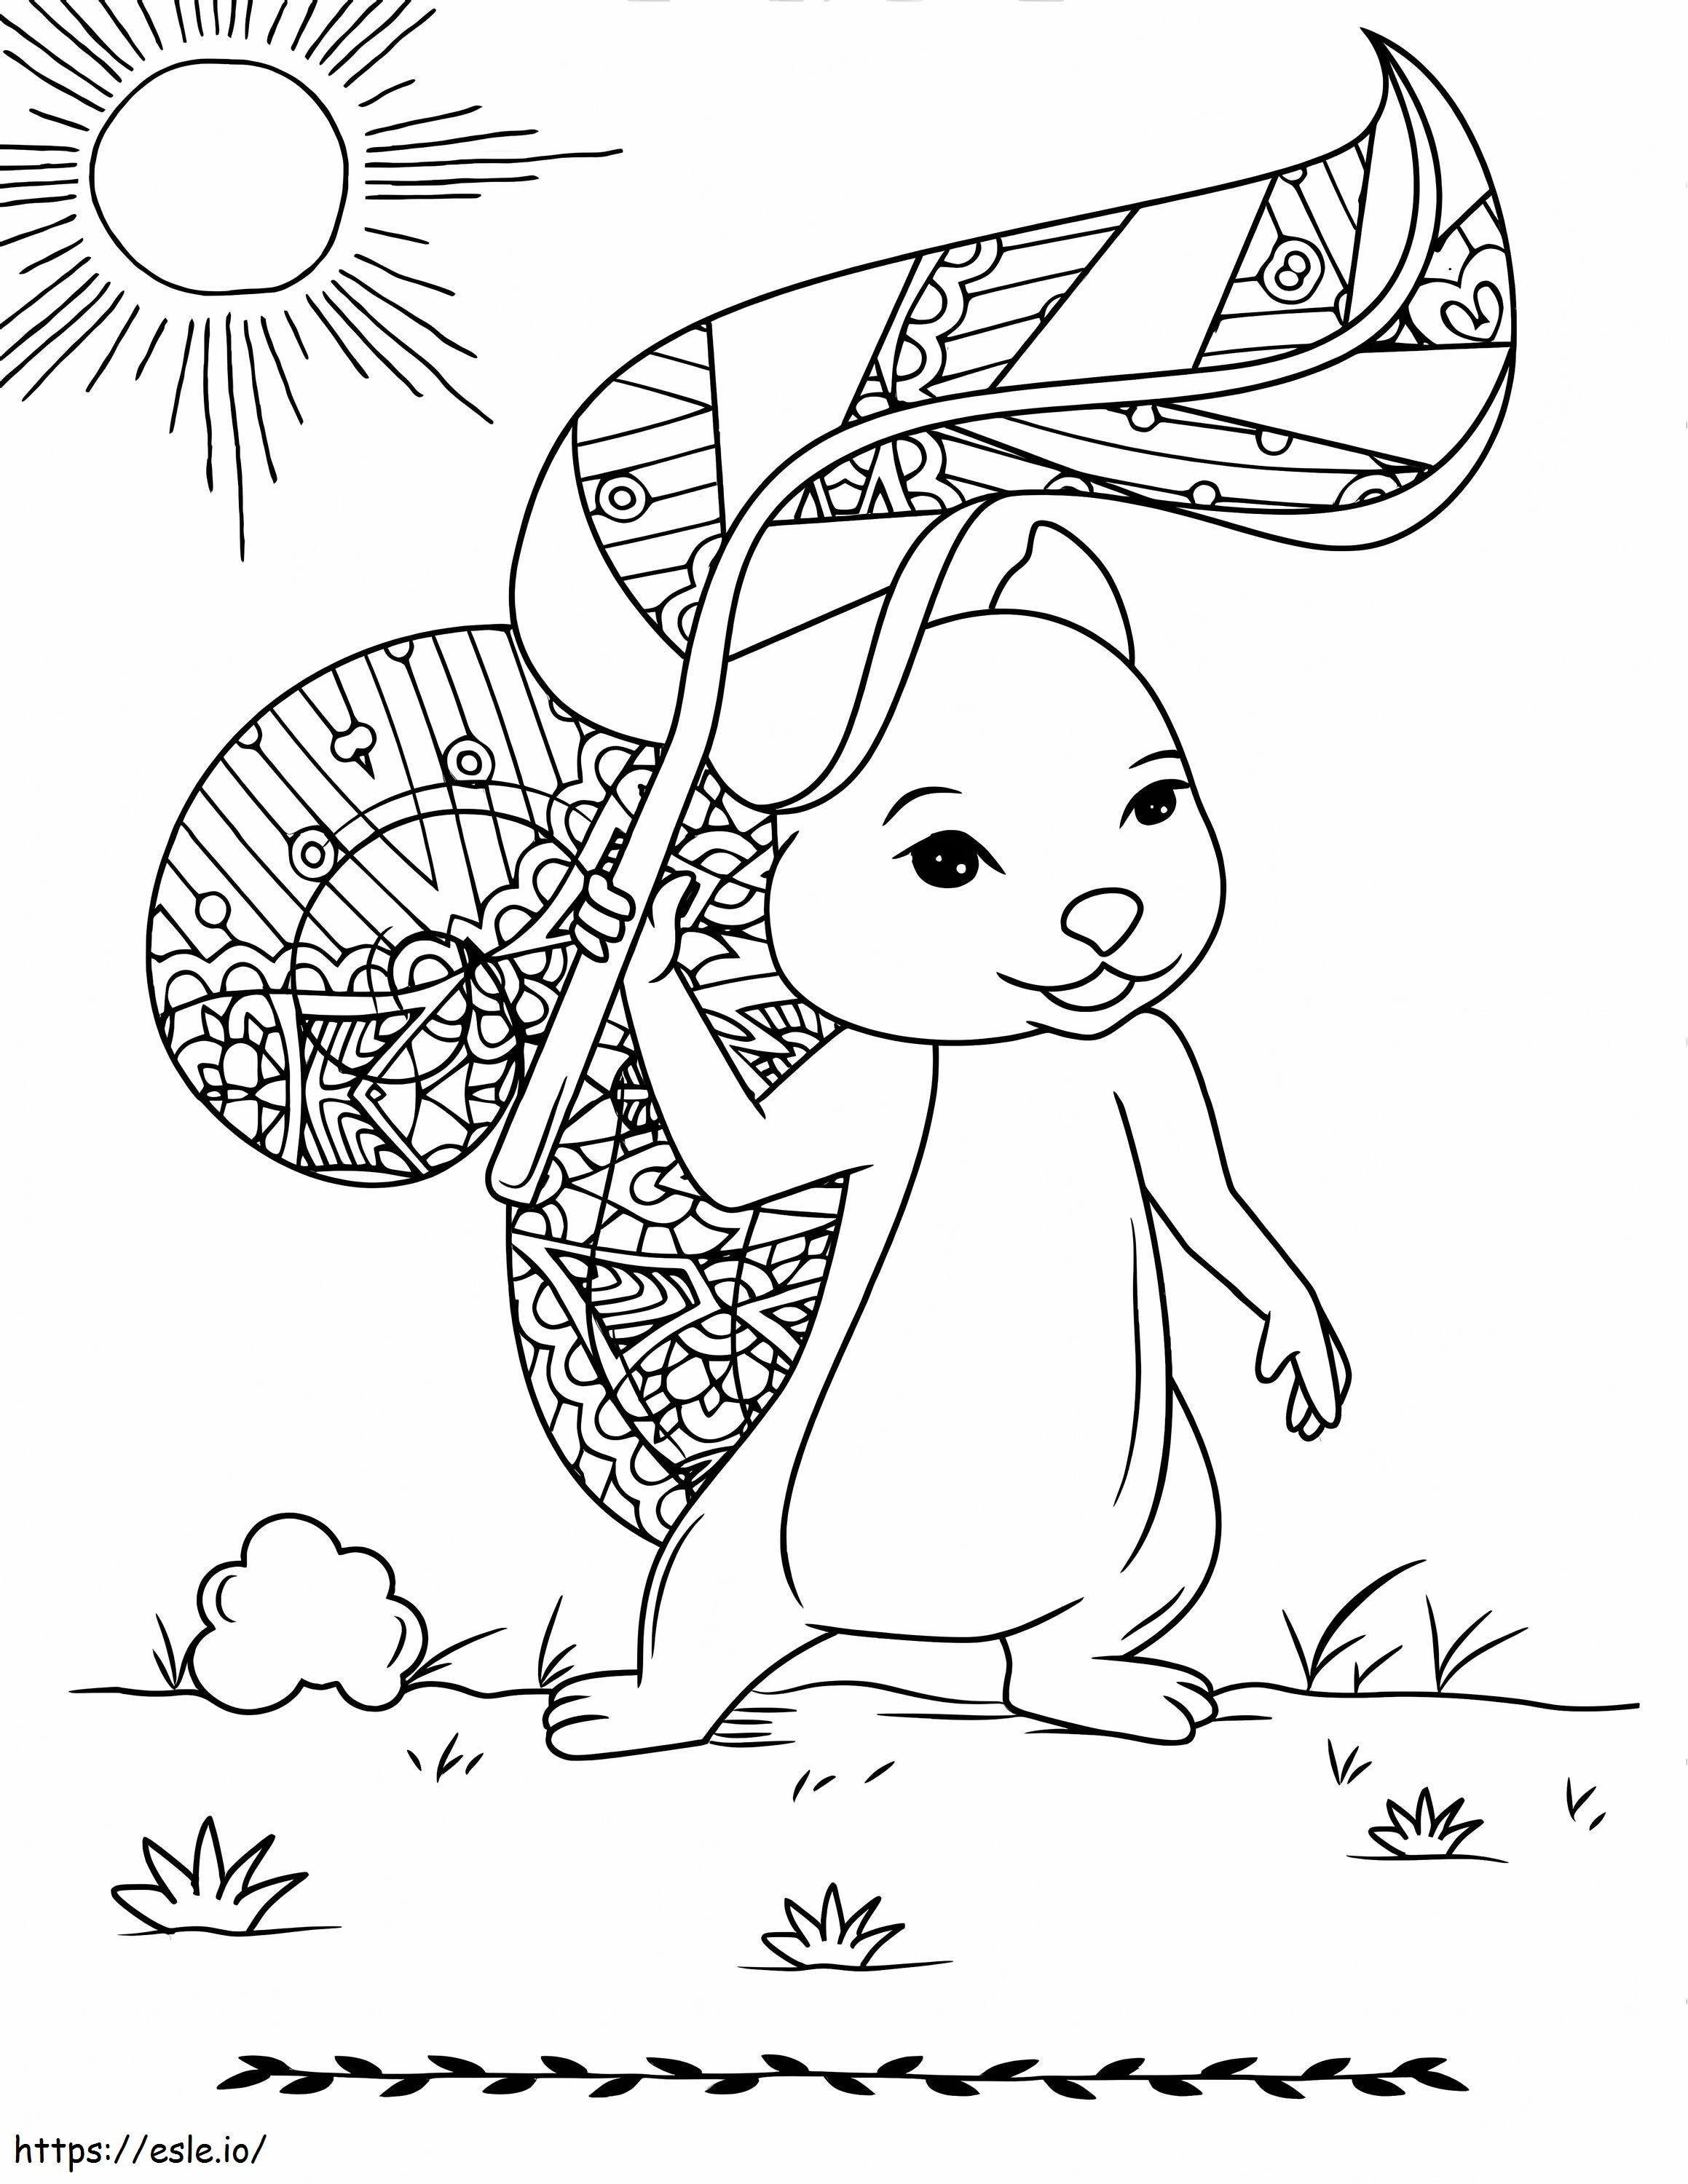 Squirrels In The Sun coloring page